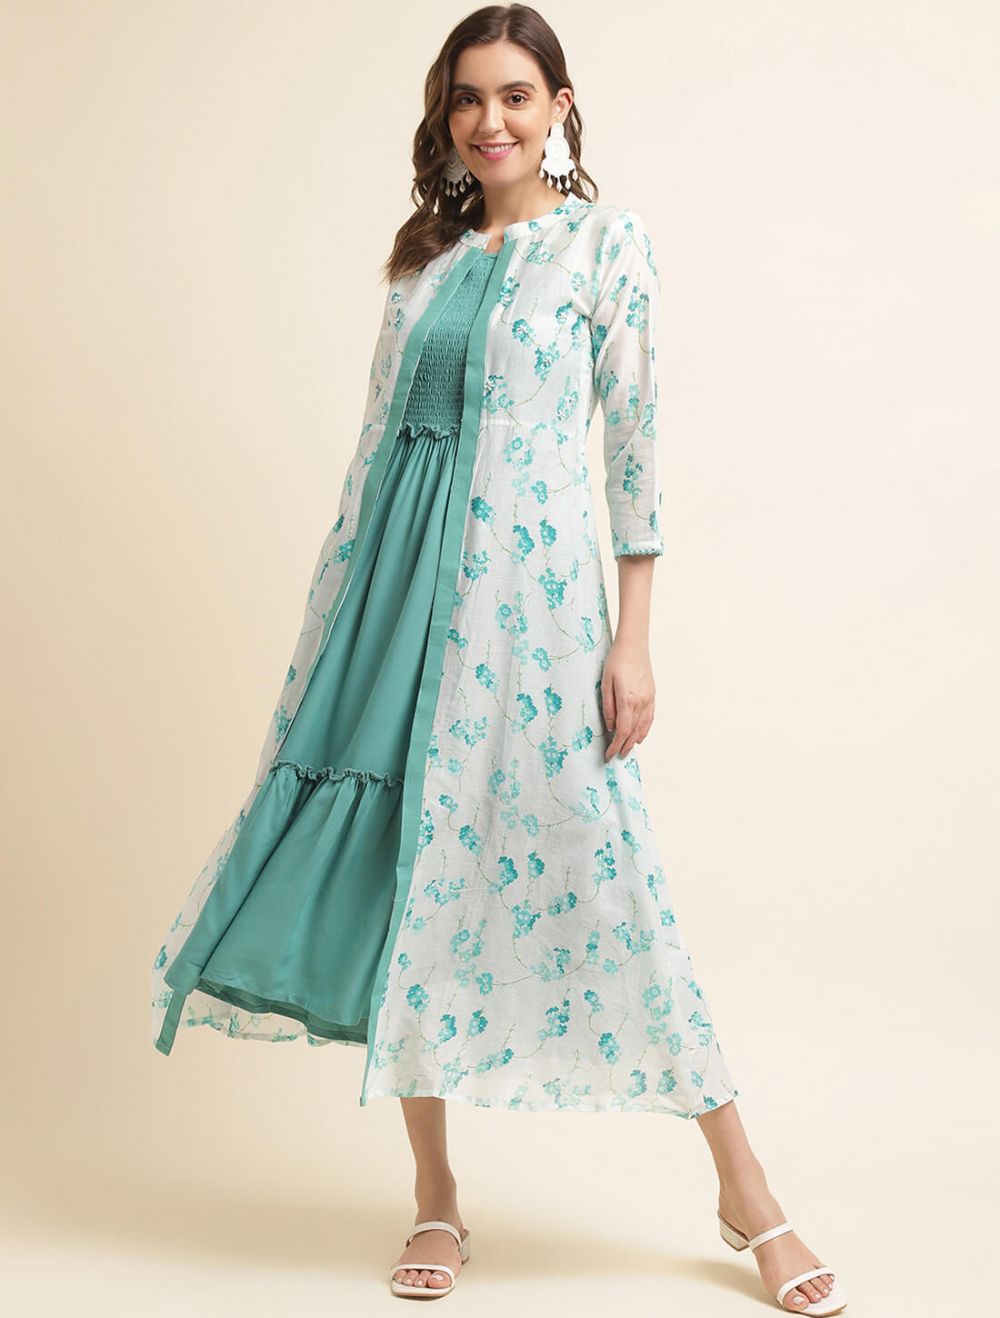 Mohua High-Low Kurti Premium cotton Kurti with asymmetric cut and minimal  Mohua hand print inspired by new blooms of the season. It's the... |  Instagram